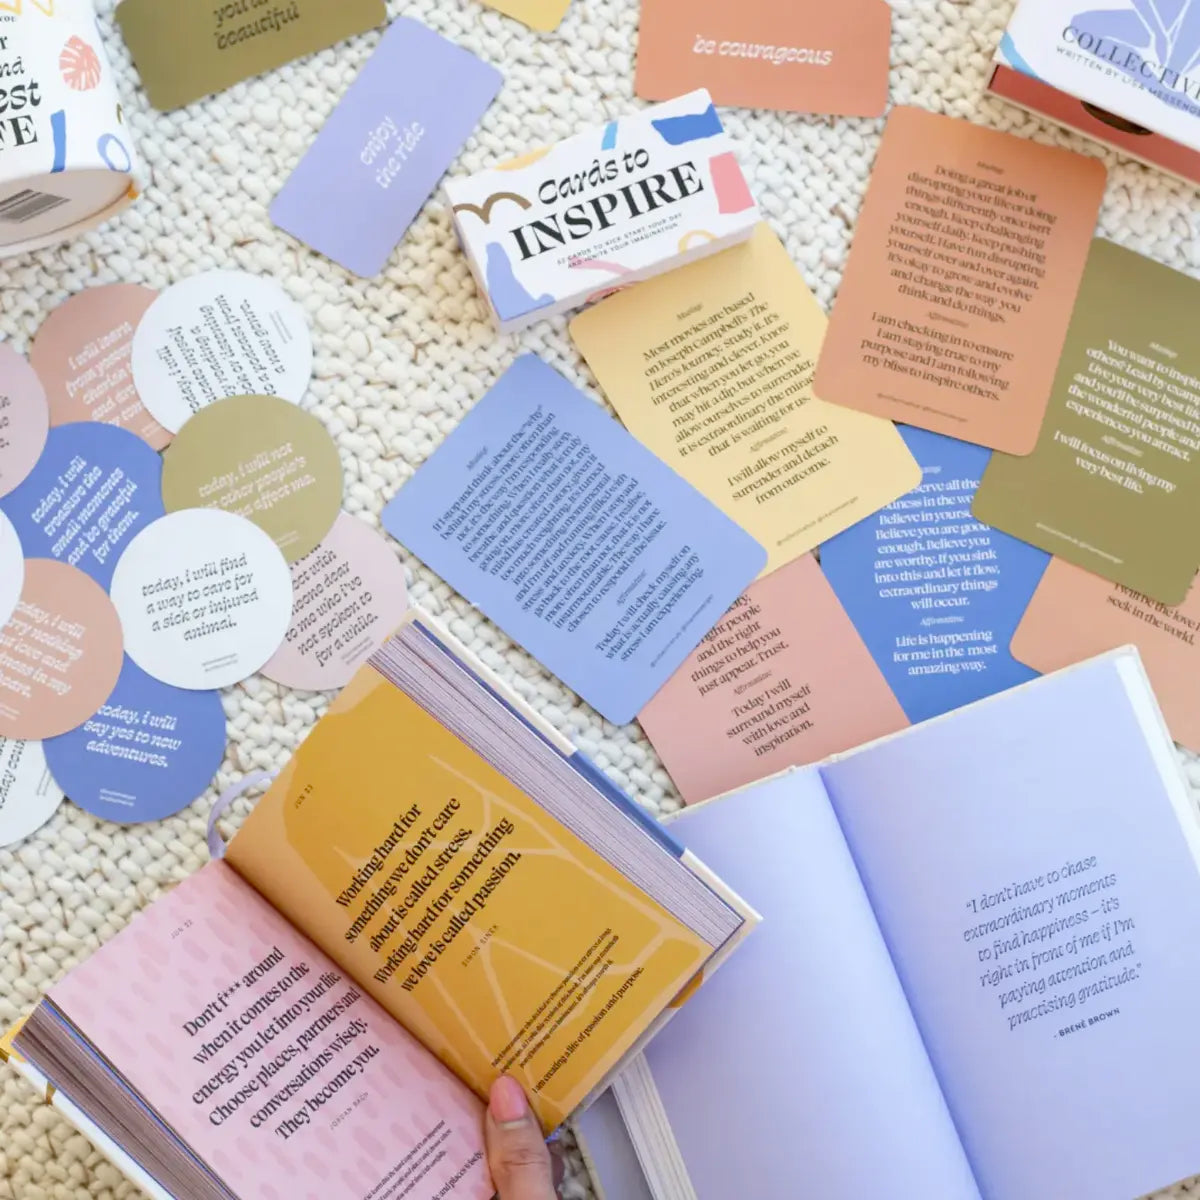 An open book with a lot of cards on it, filled with inspirational quotes and daily affirmations from "Daily Mantras to Ignite Your Purpose - V3" by Collective Hub.